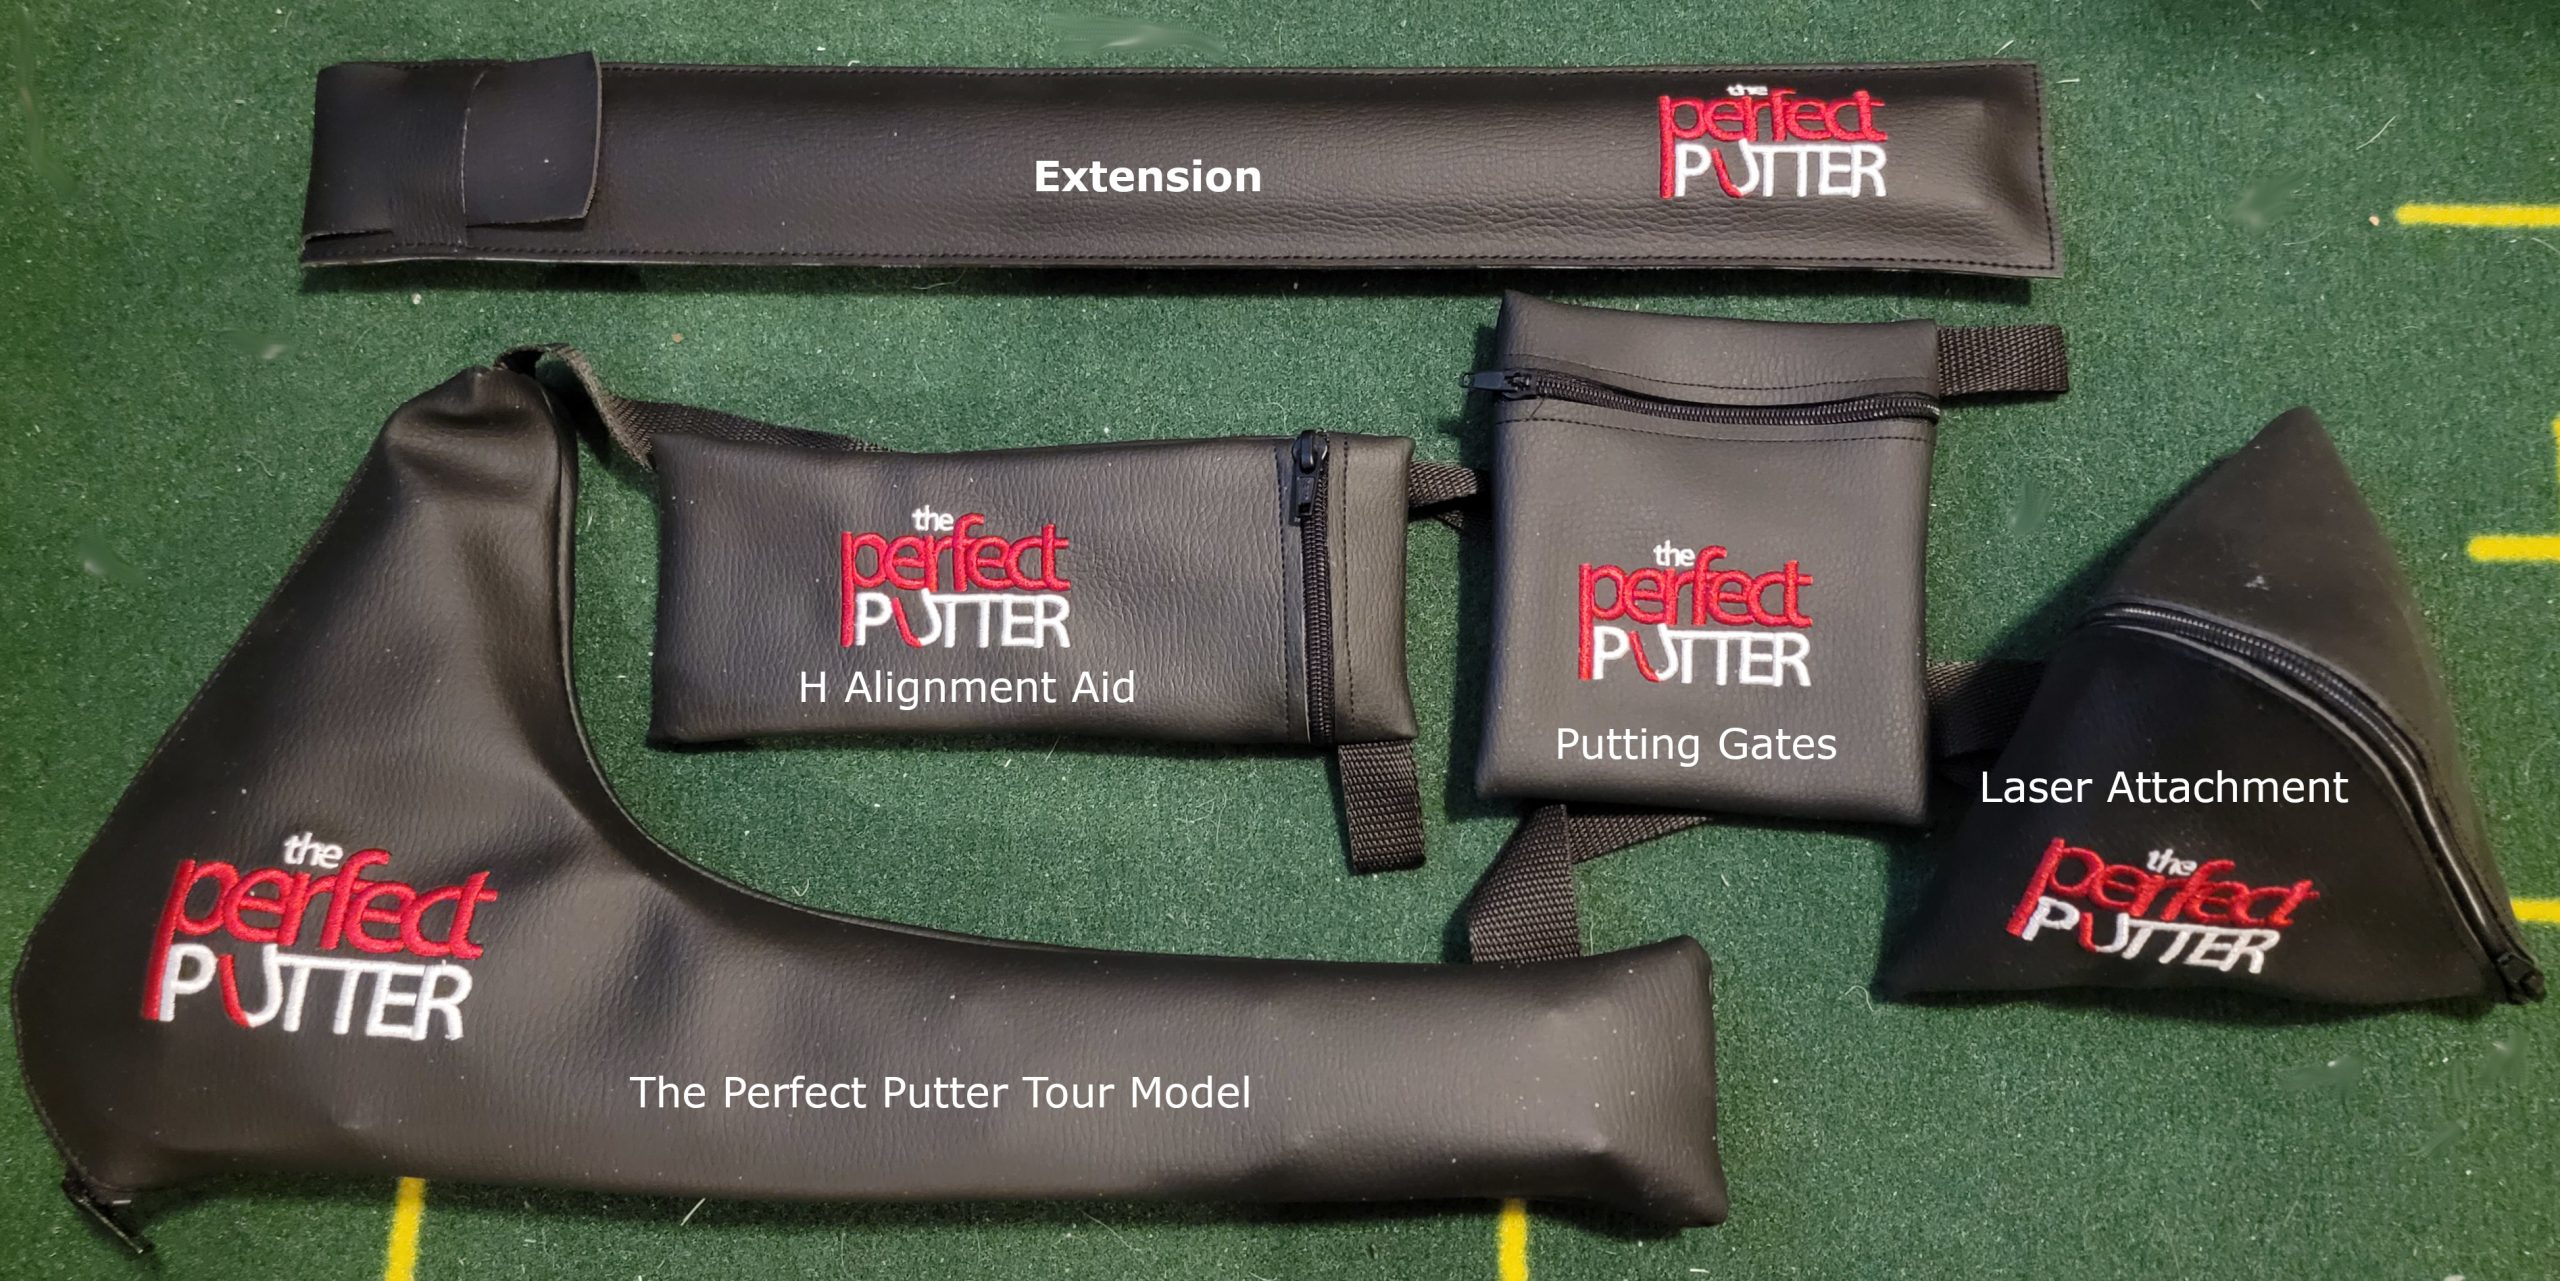 Old Duffer Golf image of The Perfect Putter Tour Model